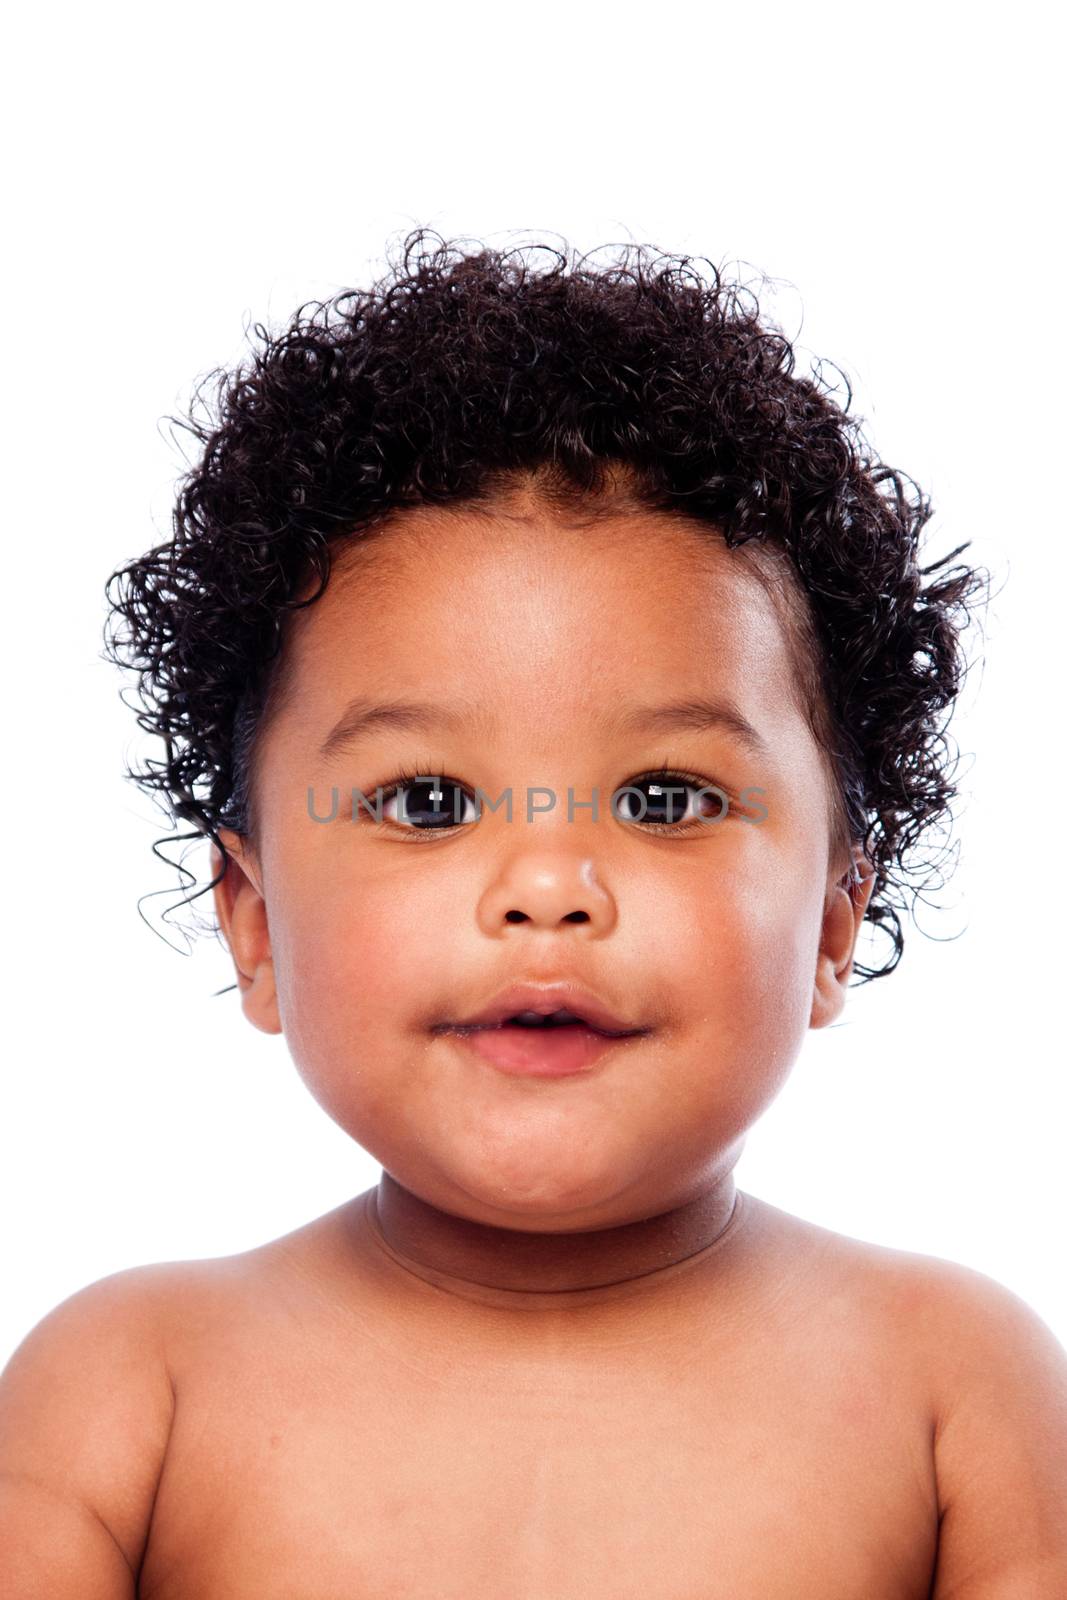 Face of beautiful cute baby toddler with curly hair.